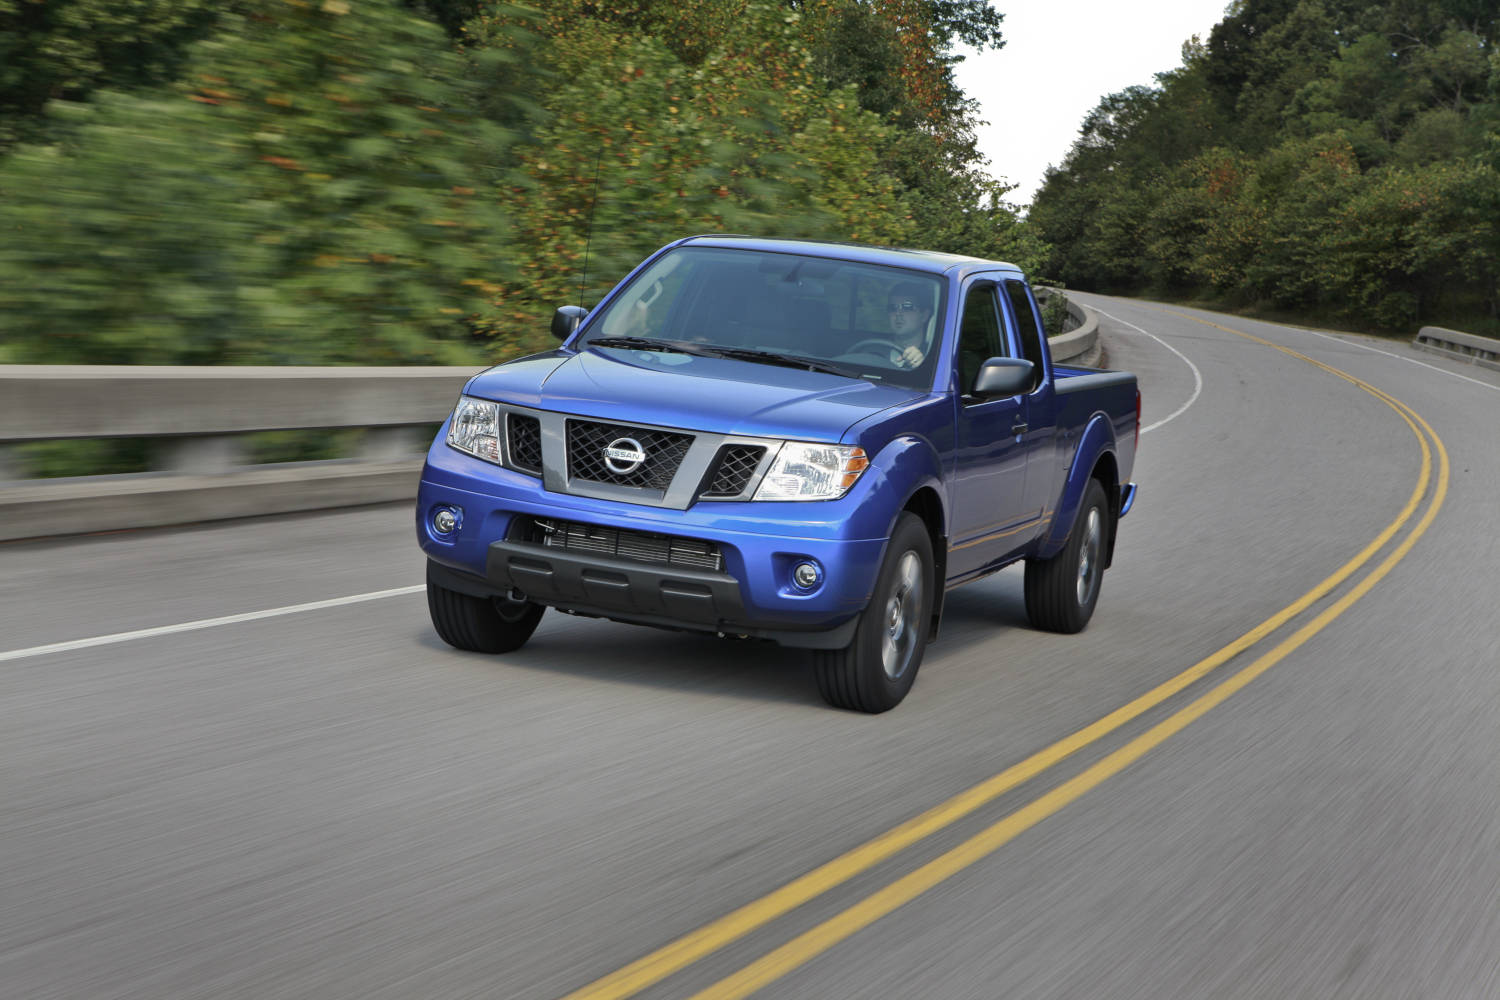 This Nissan Frontier truck will last a long time